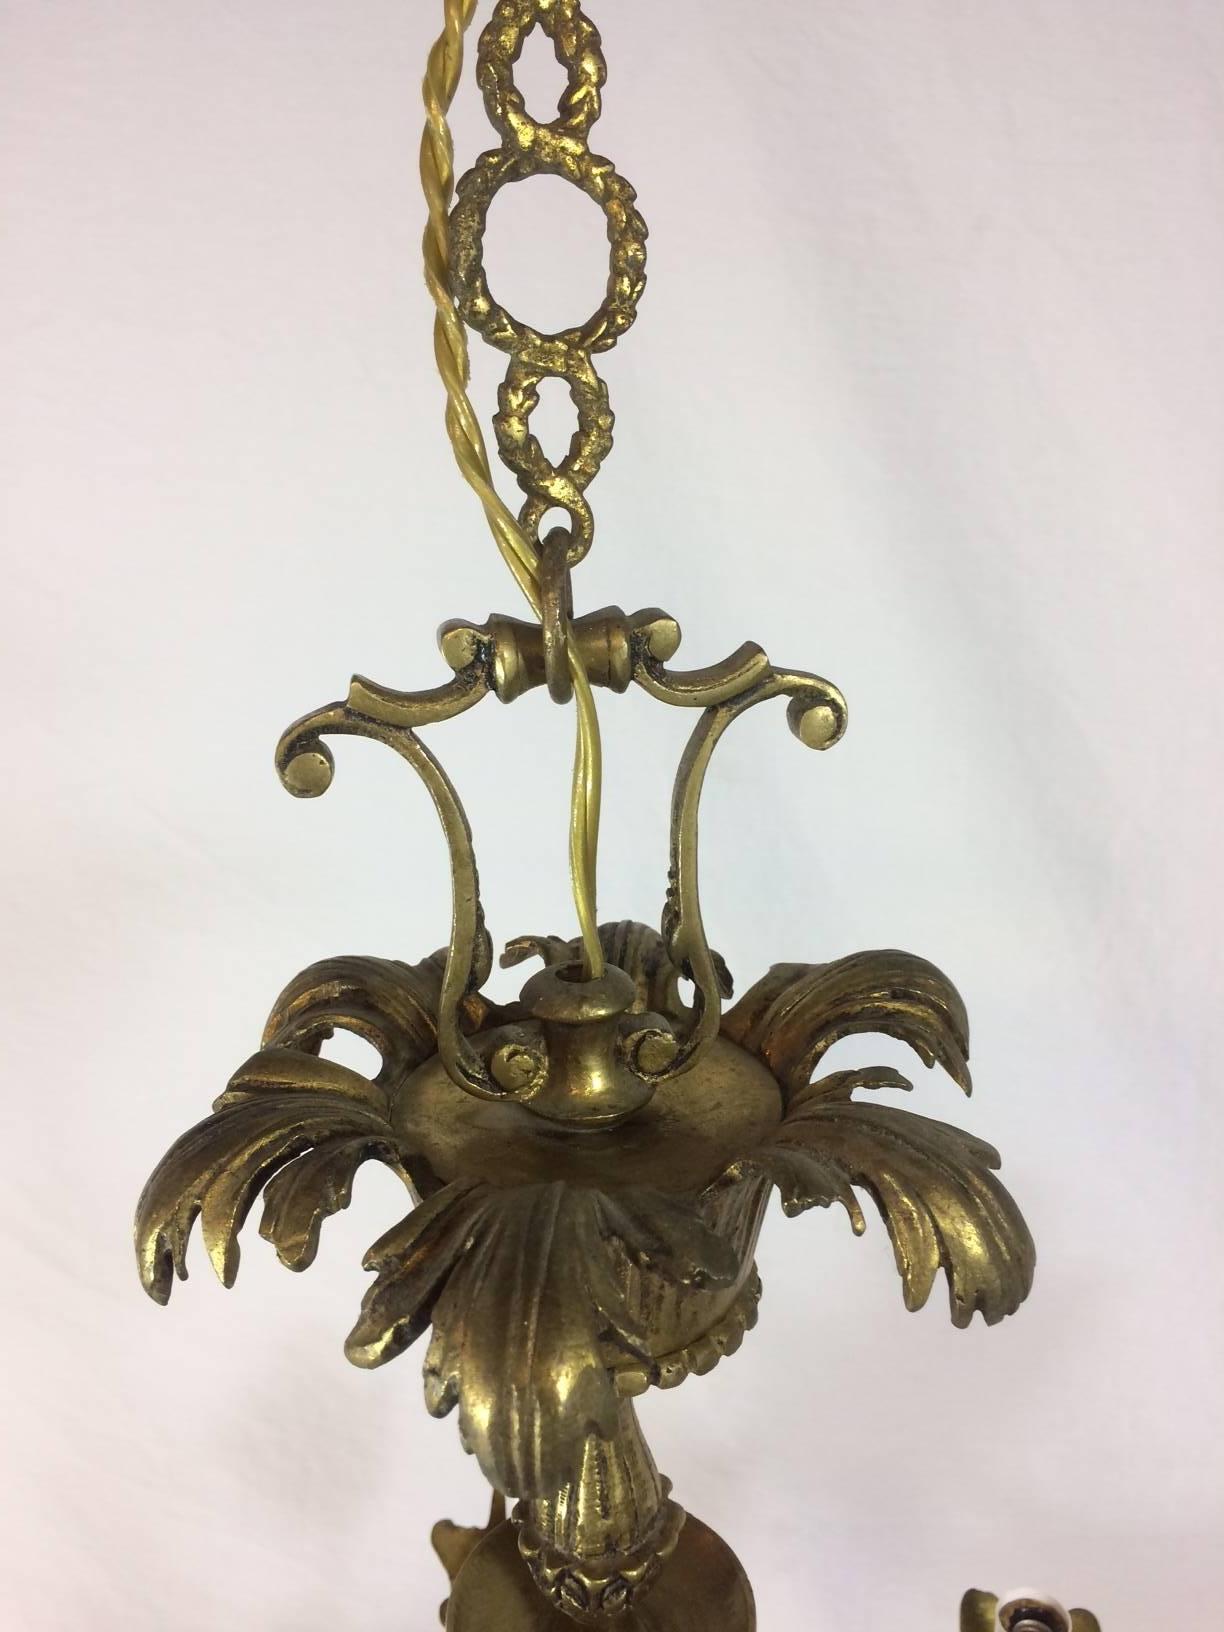 Six-arm Empire style ram's head chandelier. Solid brass and cast bronze and heavy. Has great patina. In working condition.